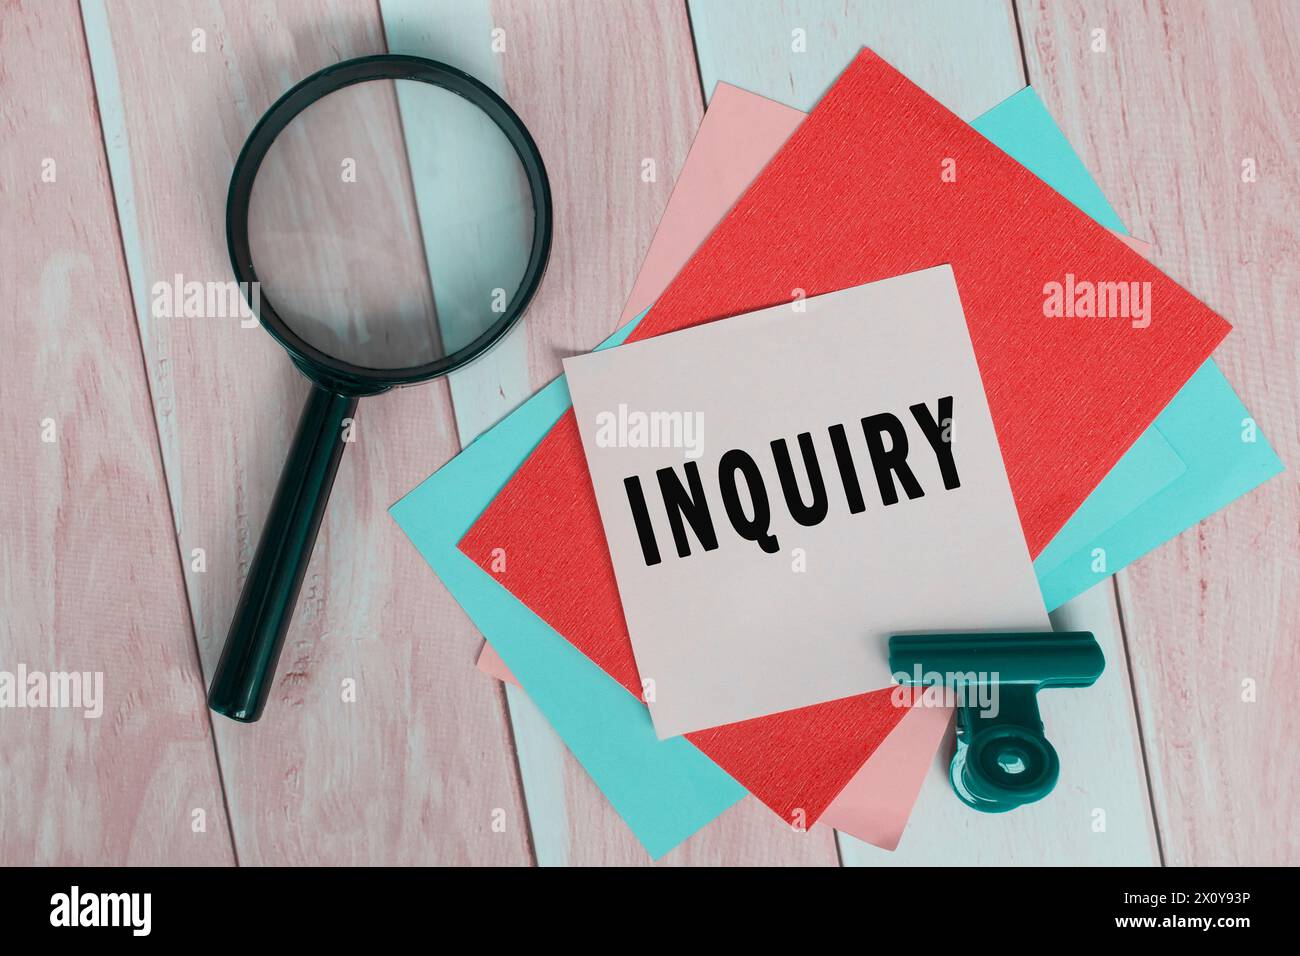 Inquiry word on colorful adhesive paper with magnifying glass. Stock Photo